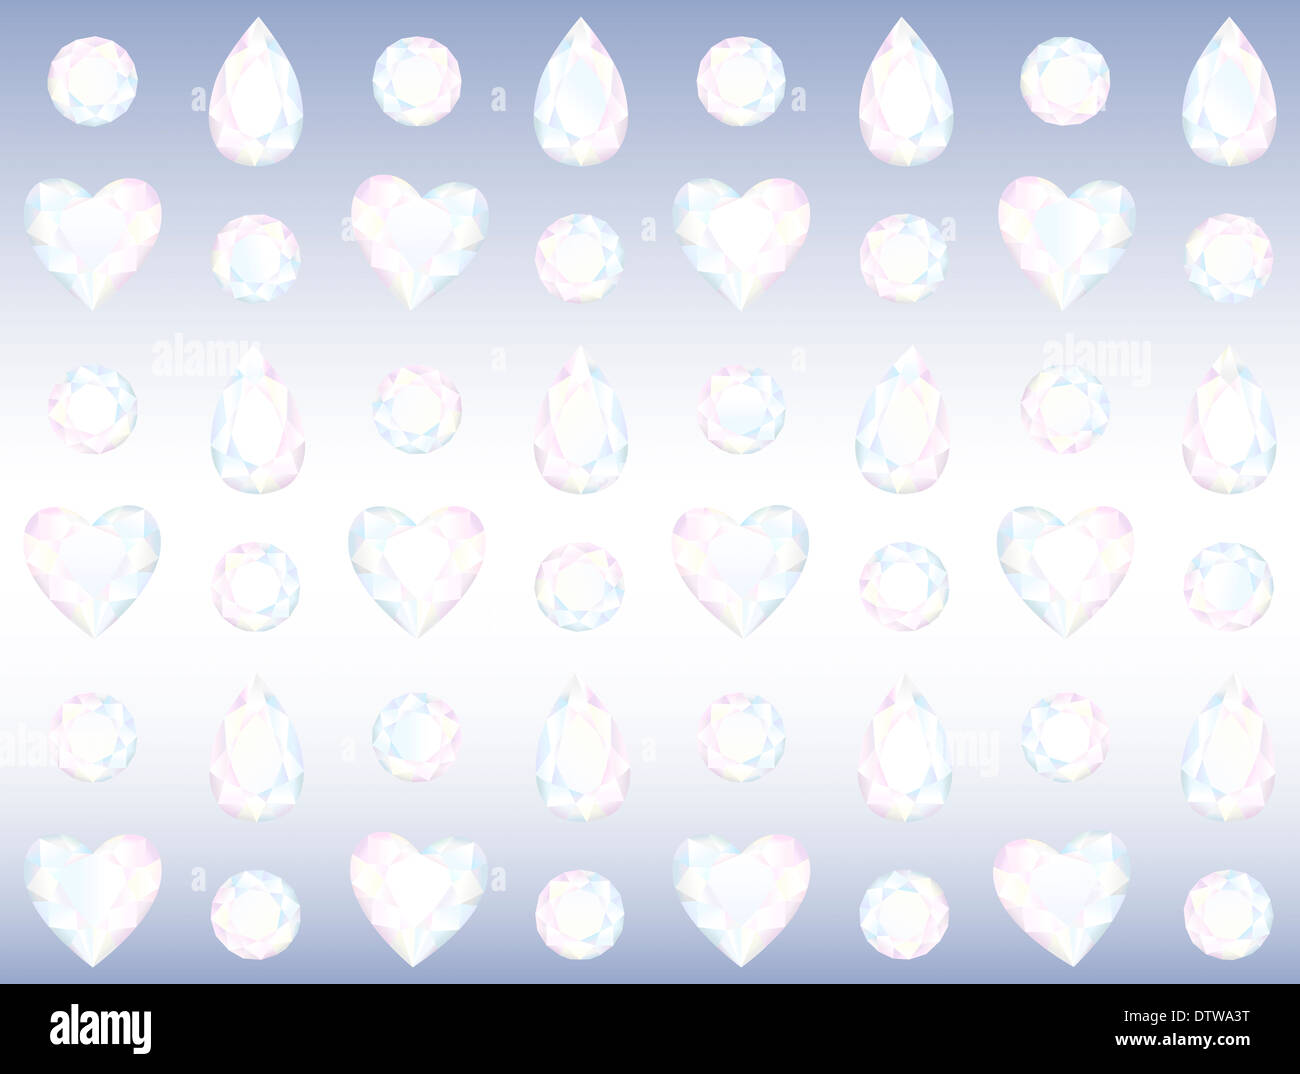 Seamless Crystal Wall composed of Hearts, Drops and Brilliants. Stock Photo